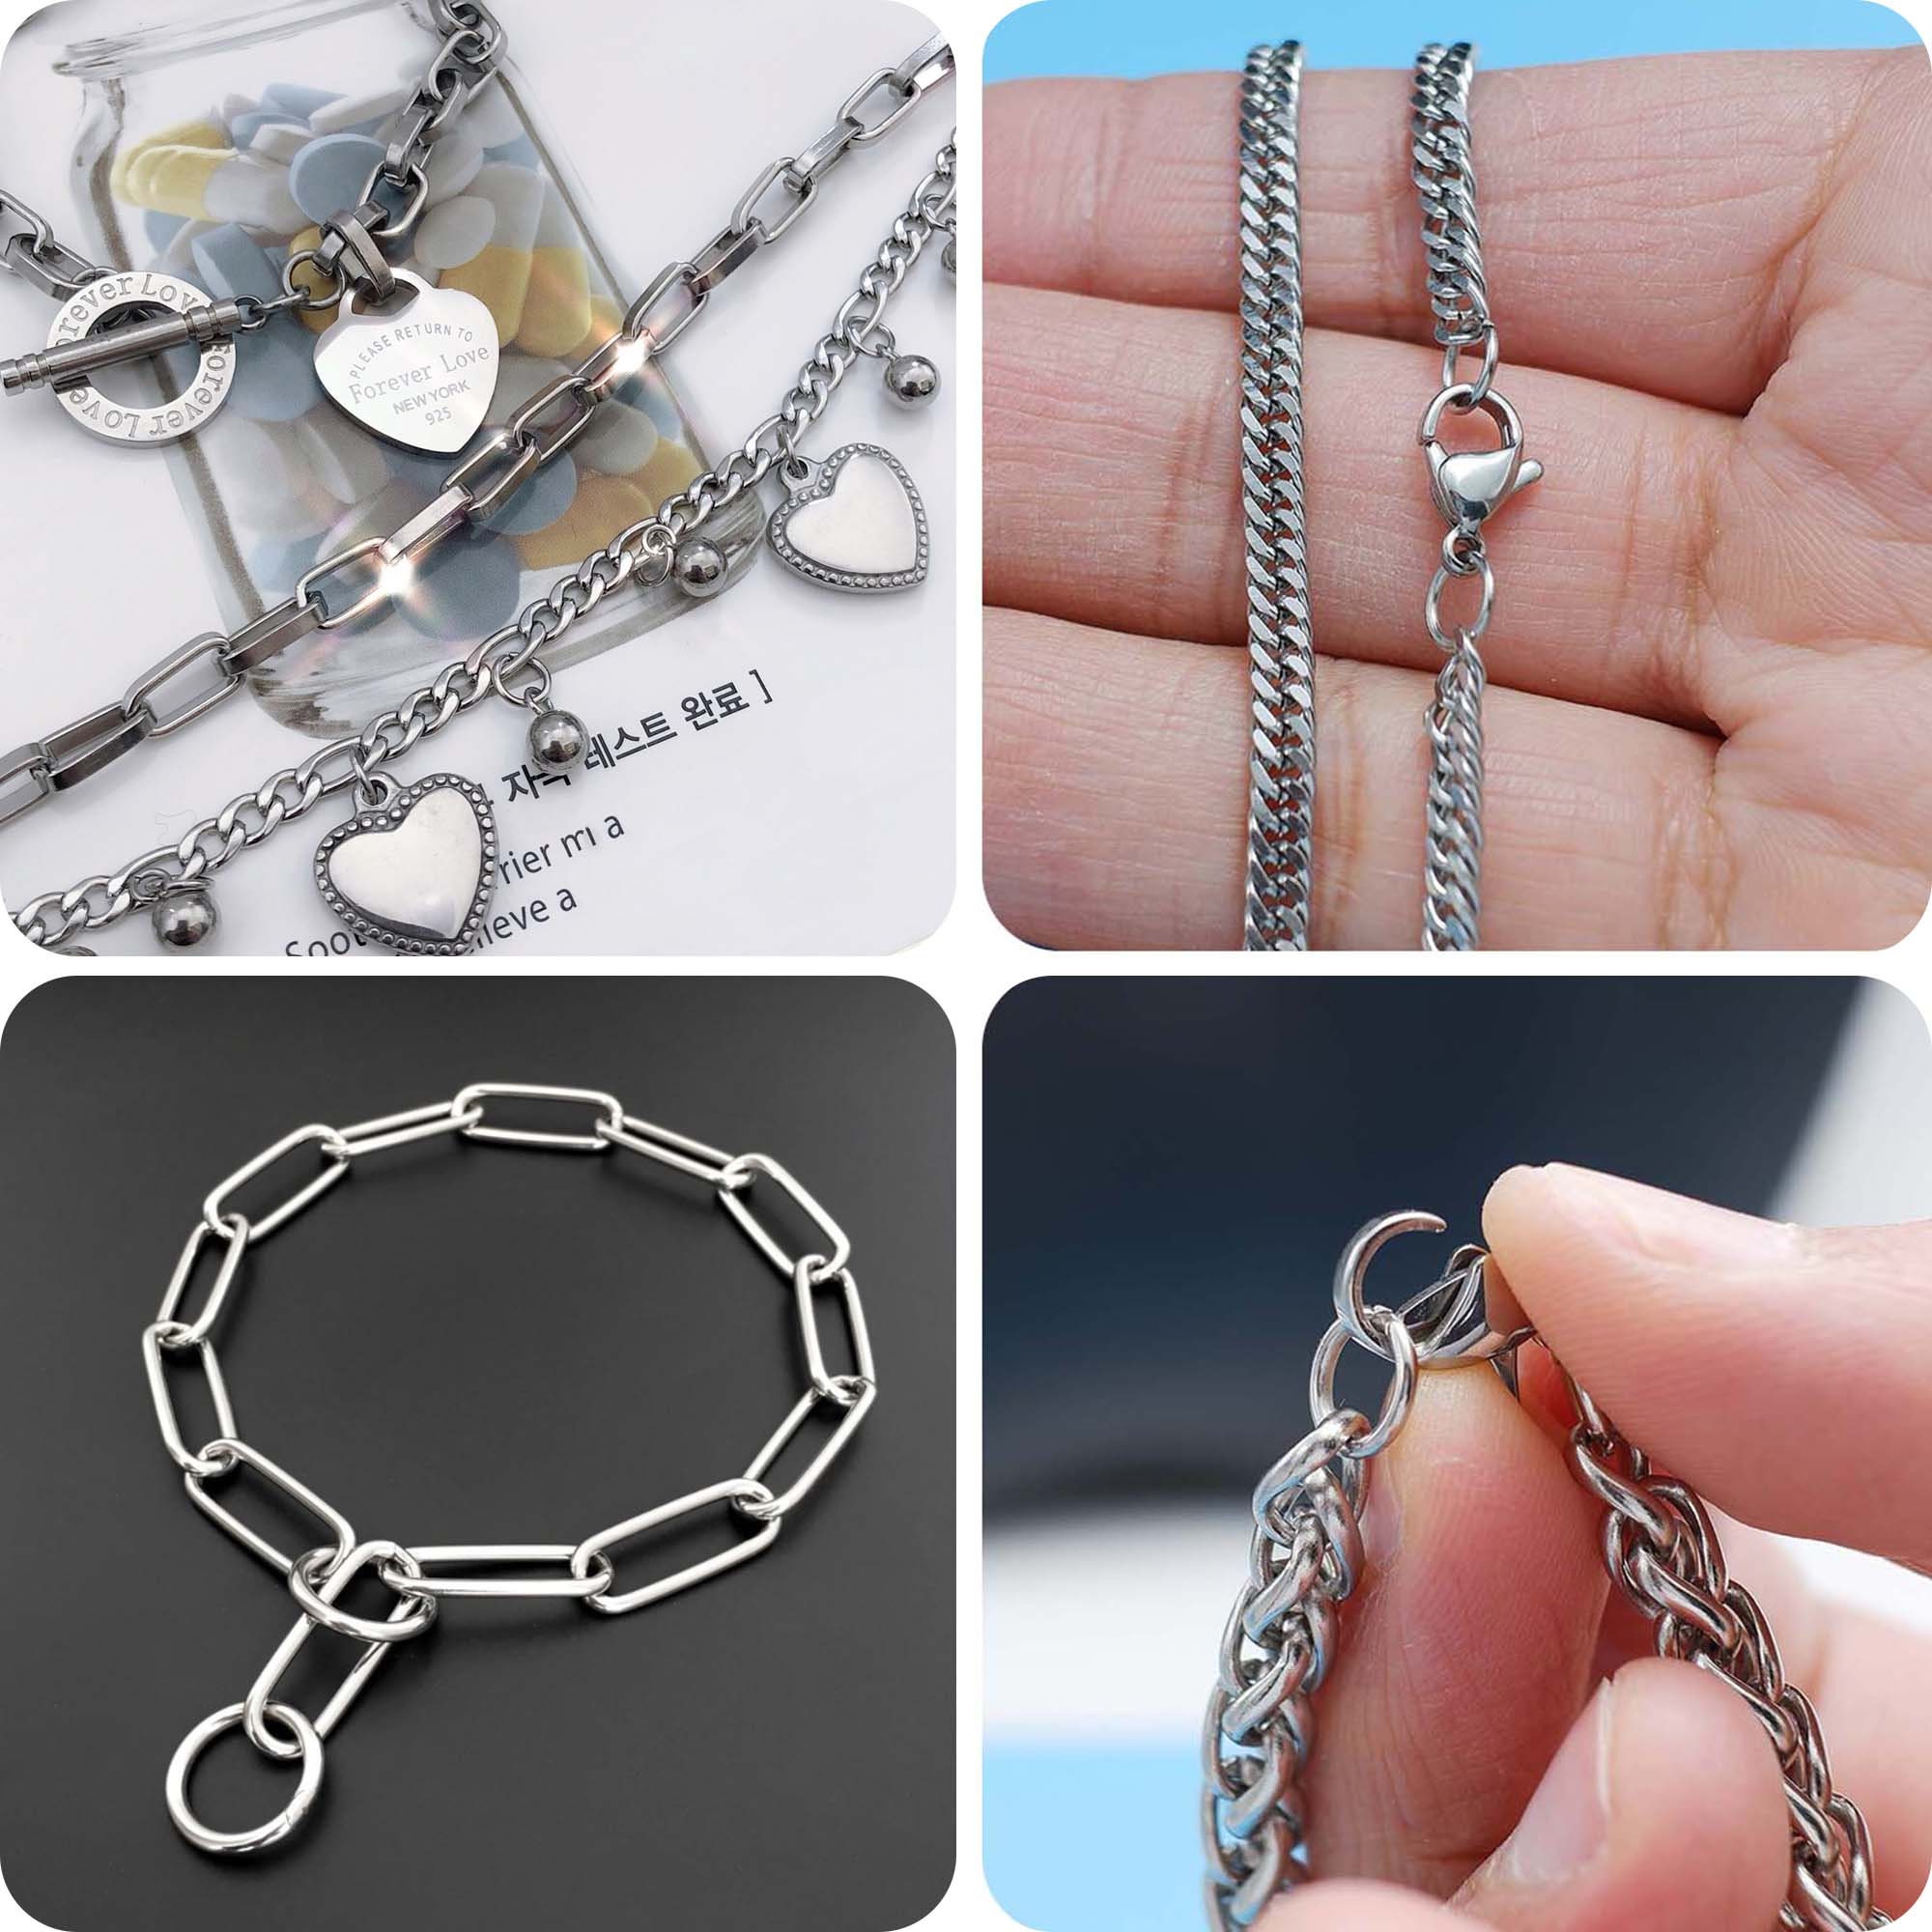 65 Feet Silver Chain Stainless Steel Chain for Jewelry Making with 40 Sets  Lobster Clasps Link Jump Rings Easy Making Necklace Bulk Chain Roll